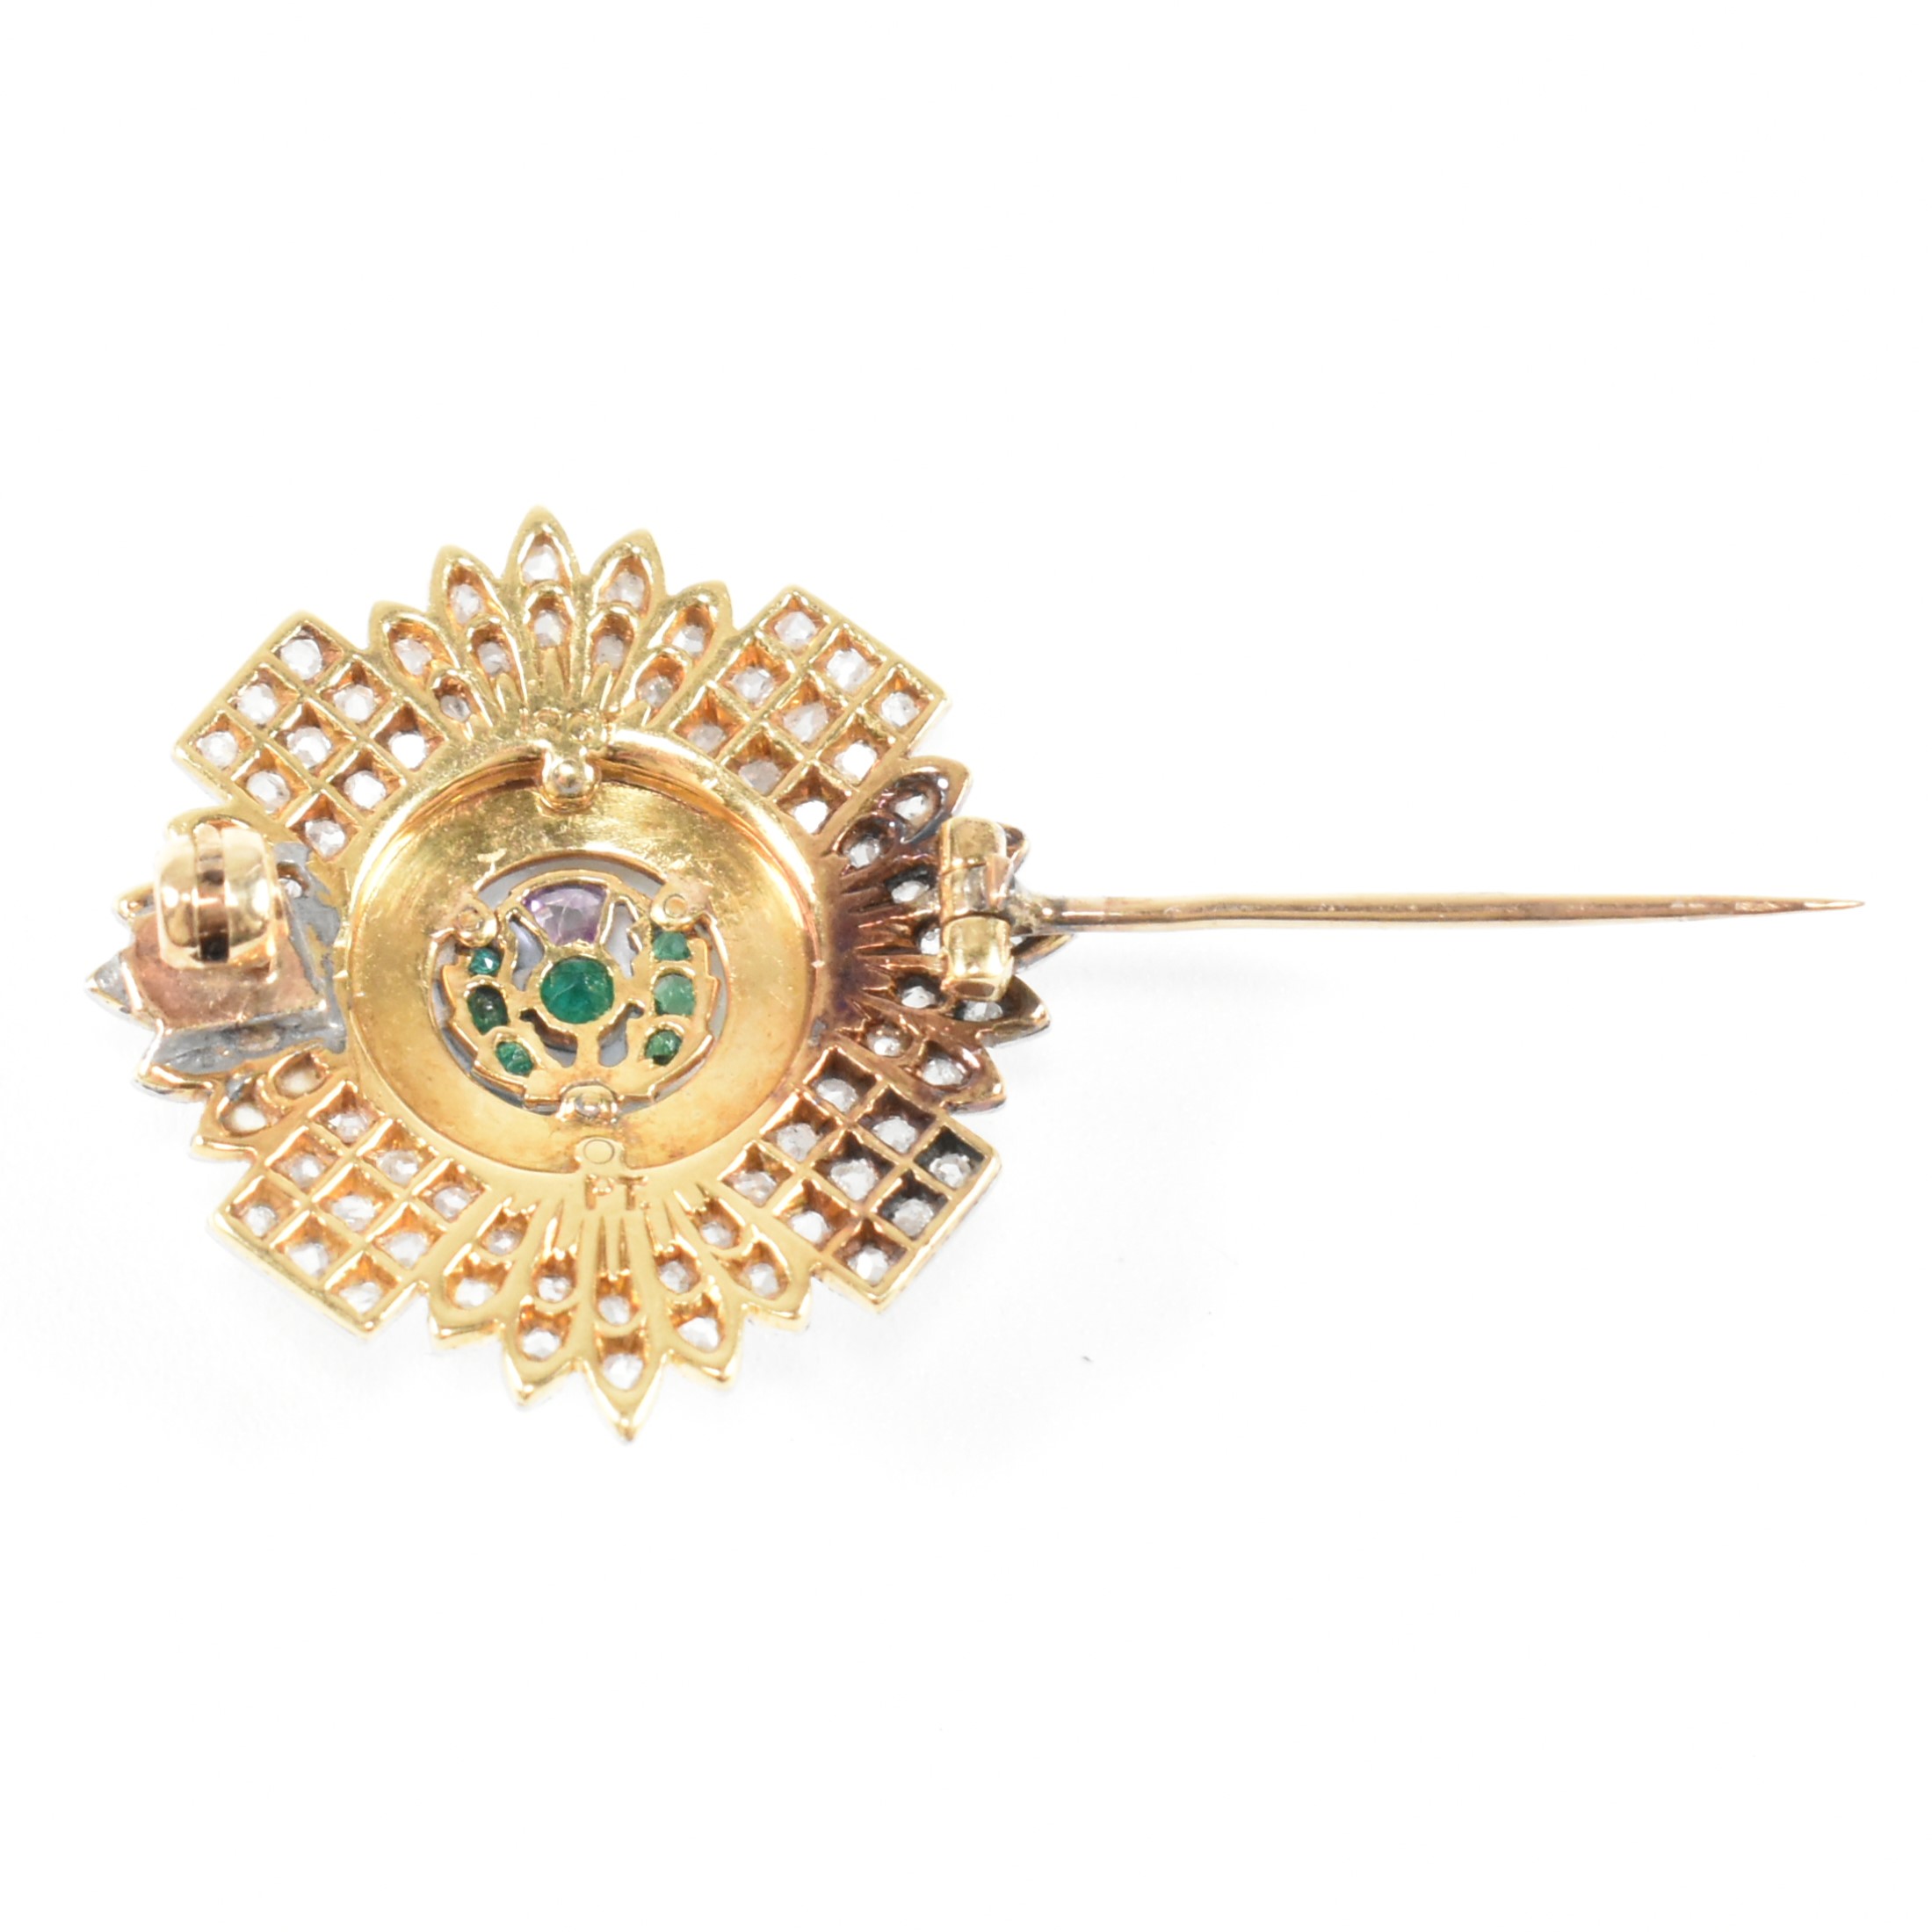 EARLY 20TH CENTURY SCOTS GUARDS SWEETHEART BROOCH - Image 3 of 8